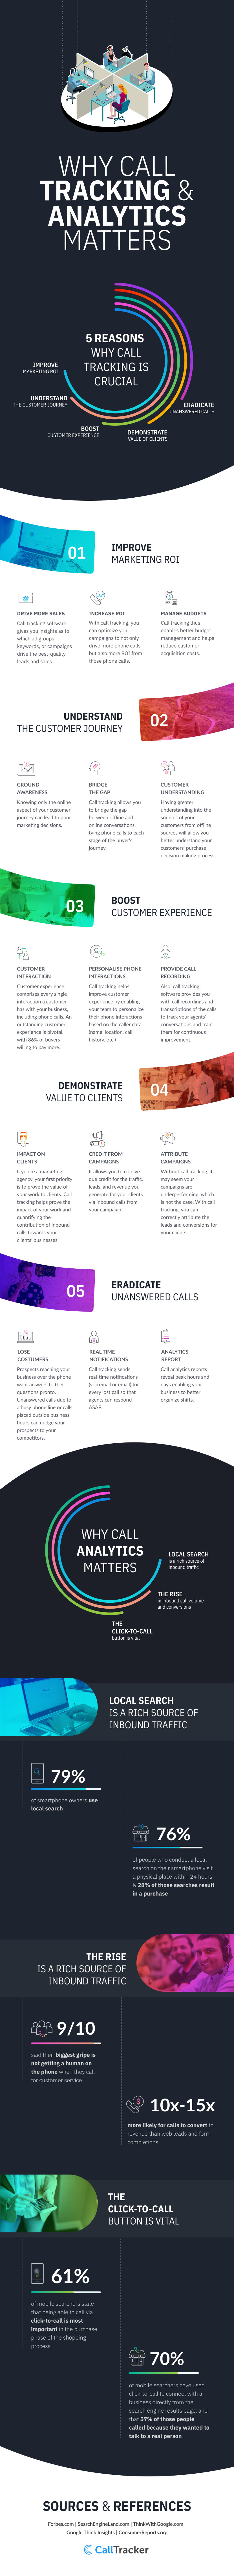 why call tracking analytics matters infographic